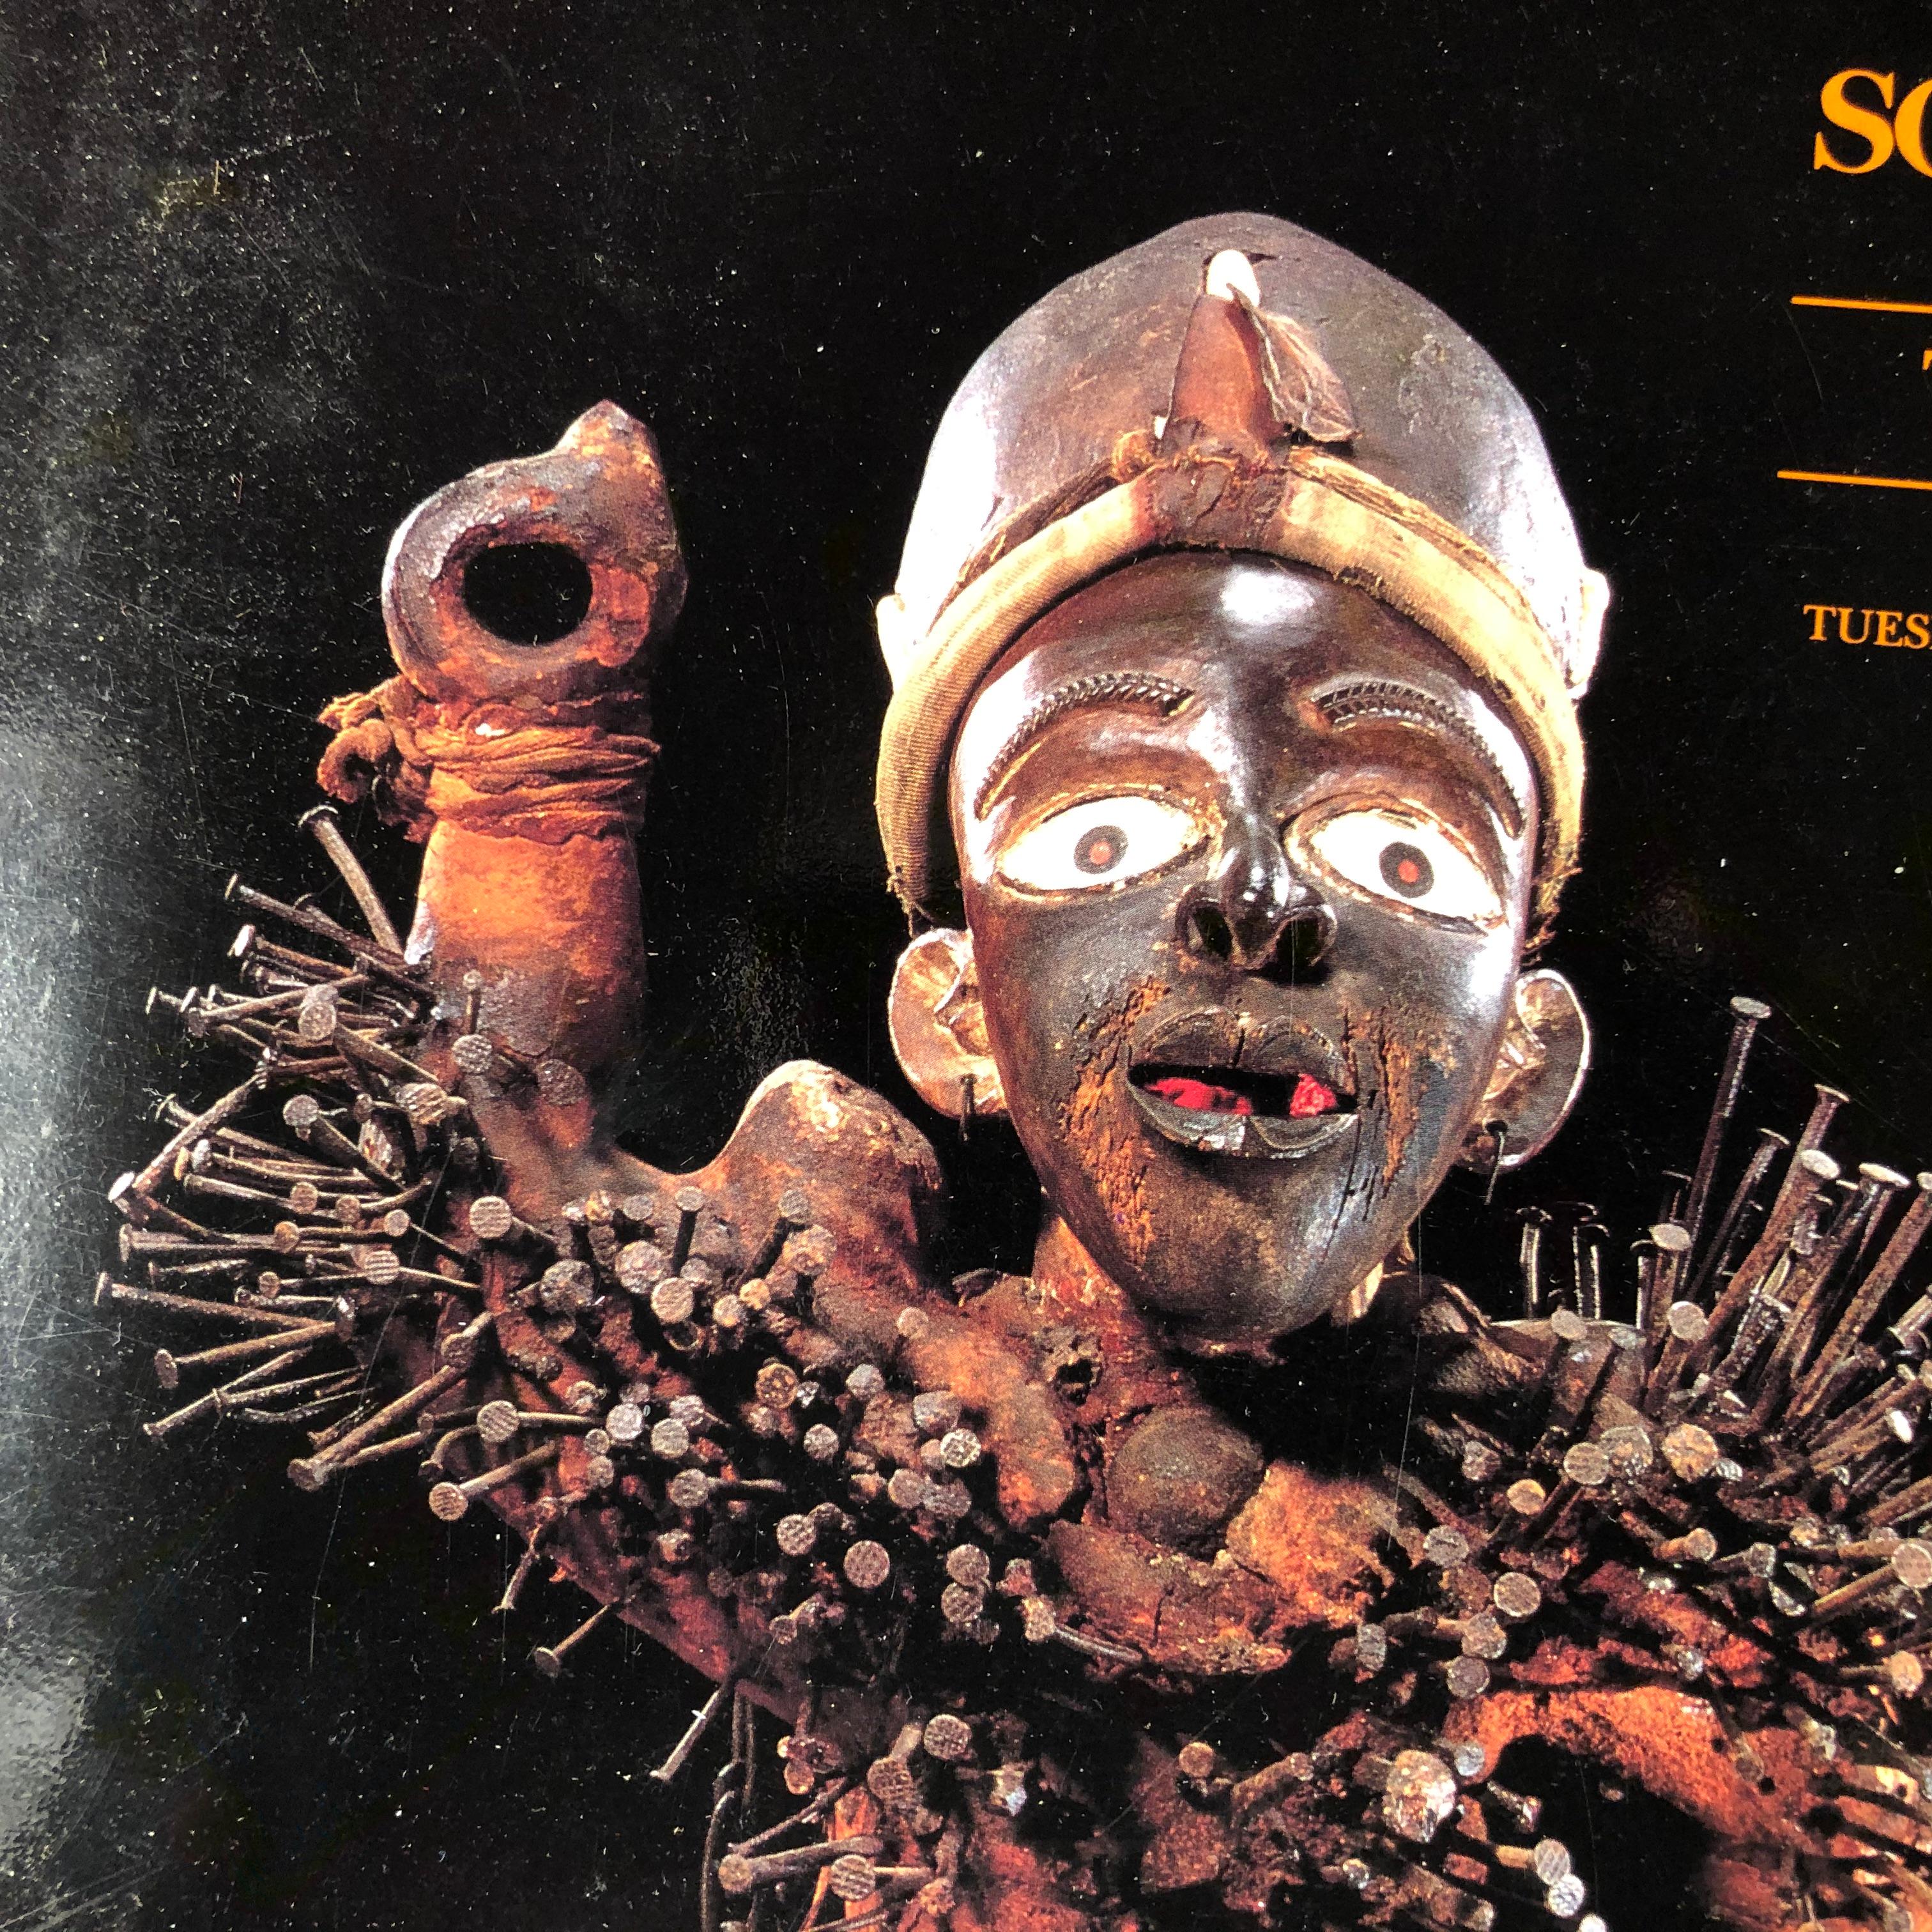 From our 25 year old library and private collection, we offer

Twenty (20) issues of Sotheby's auction catalogs for Collectors and Connoisseurs of African and Oceanic Art, 1991-2001

Collections sold at auction include many famous